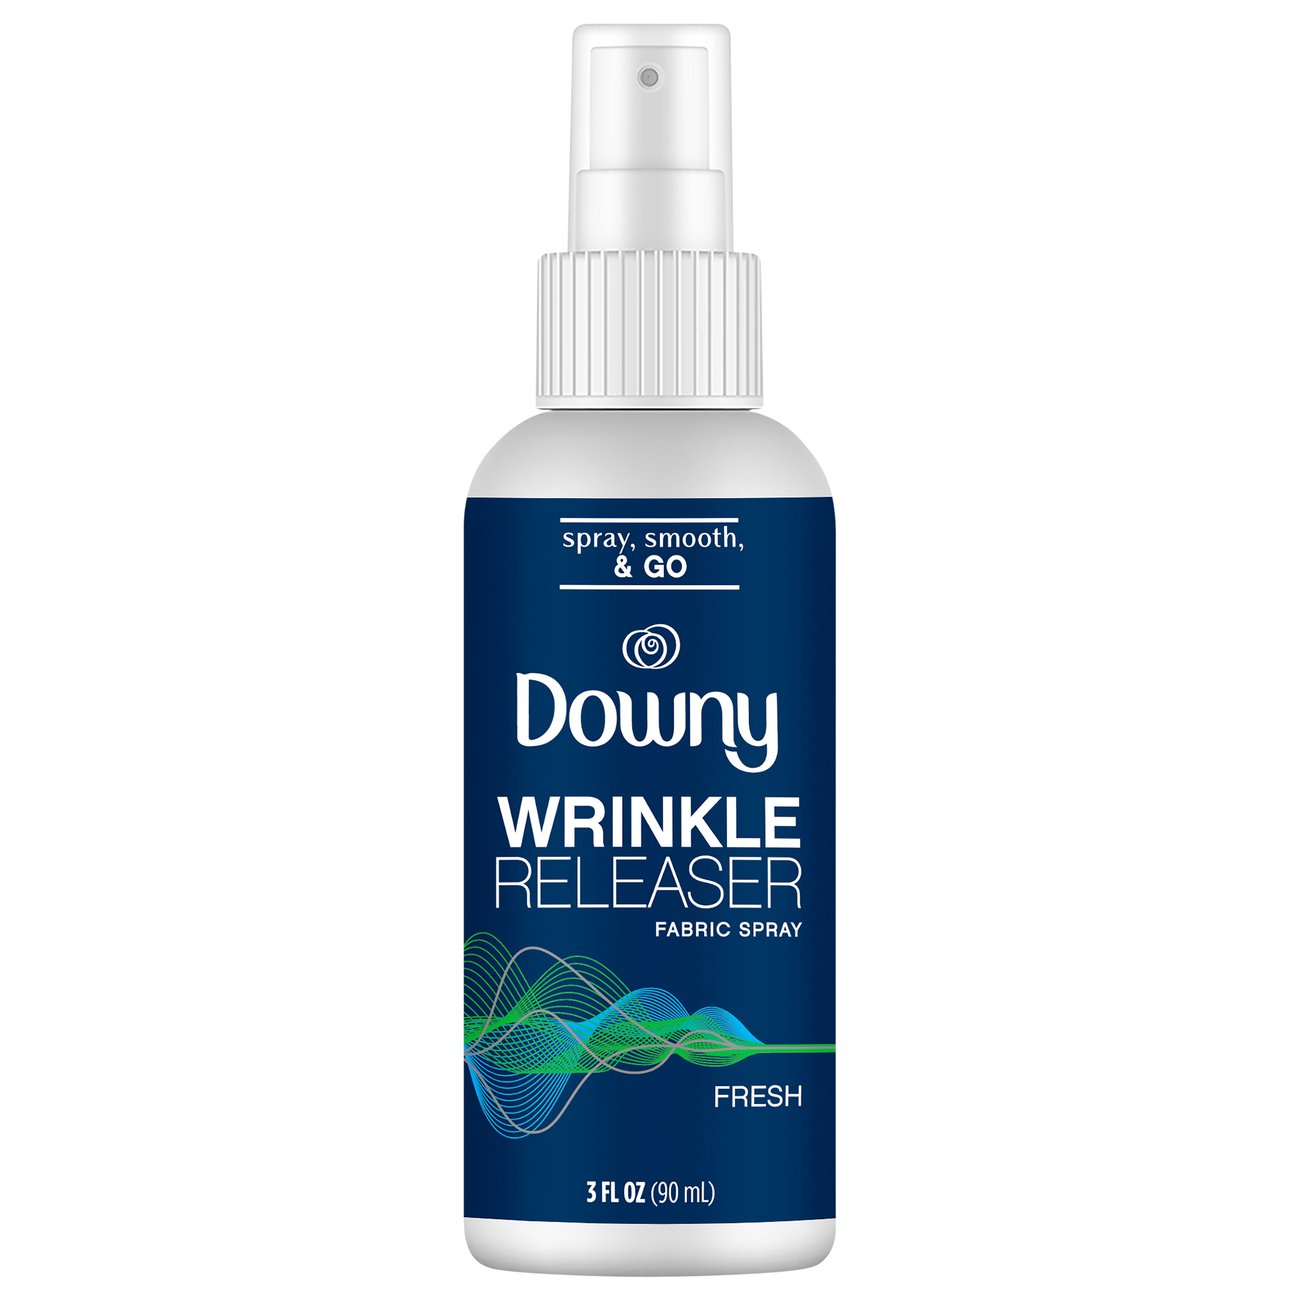 Downy Wrinkle Releaser Plus Travel Size Shop Fresheners at HEB